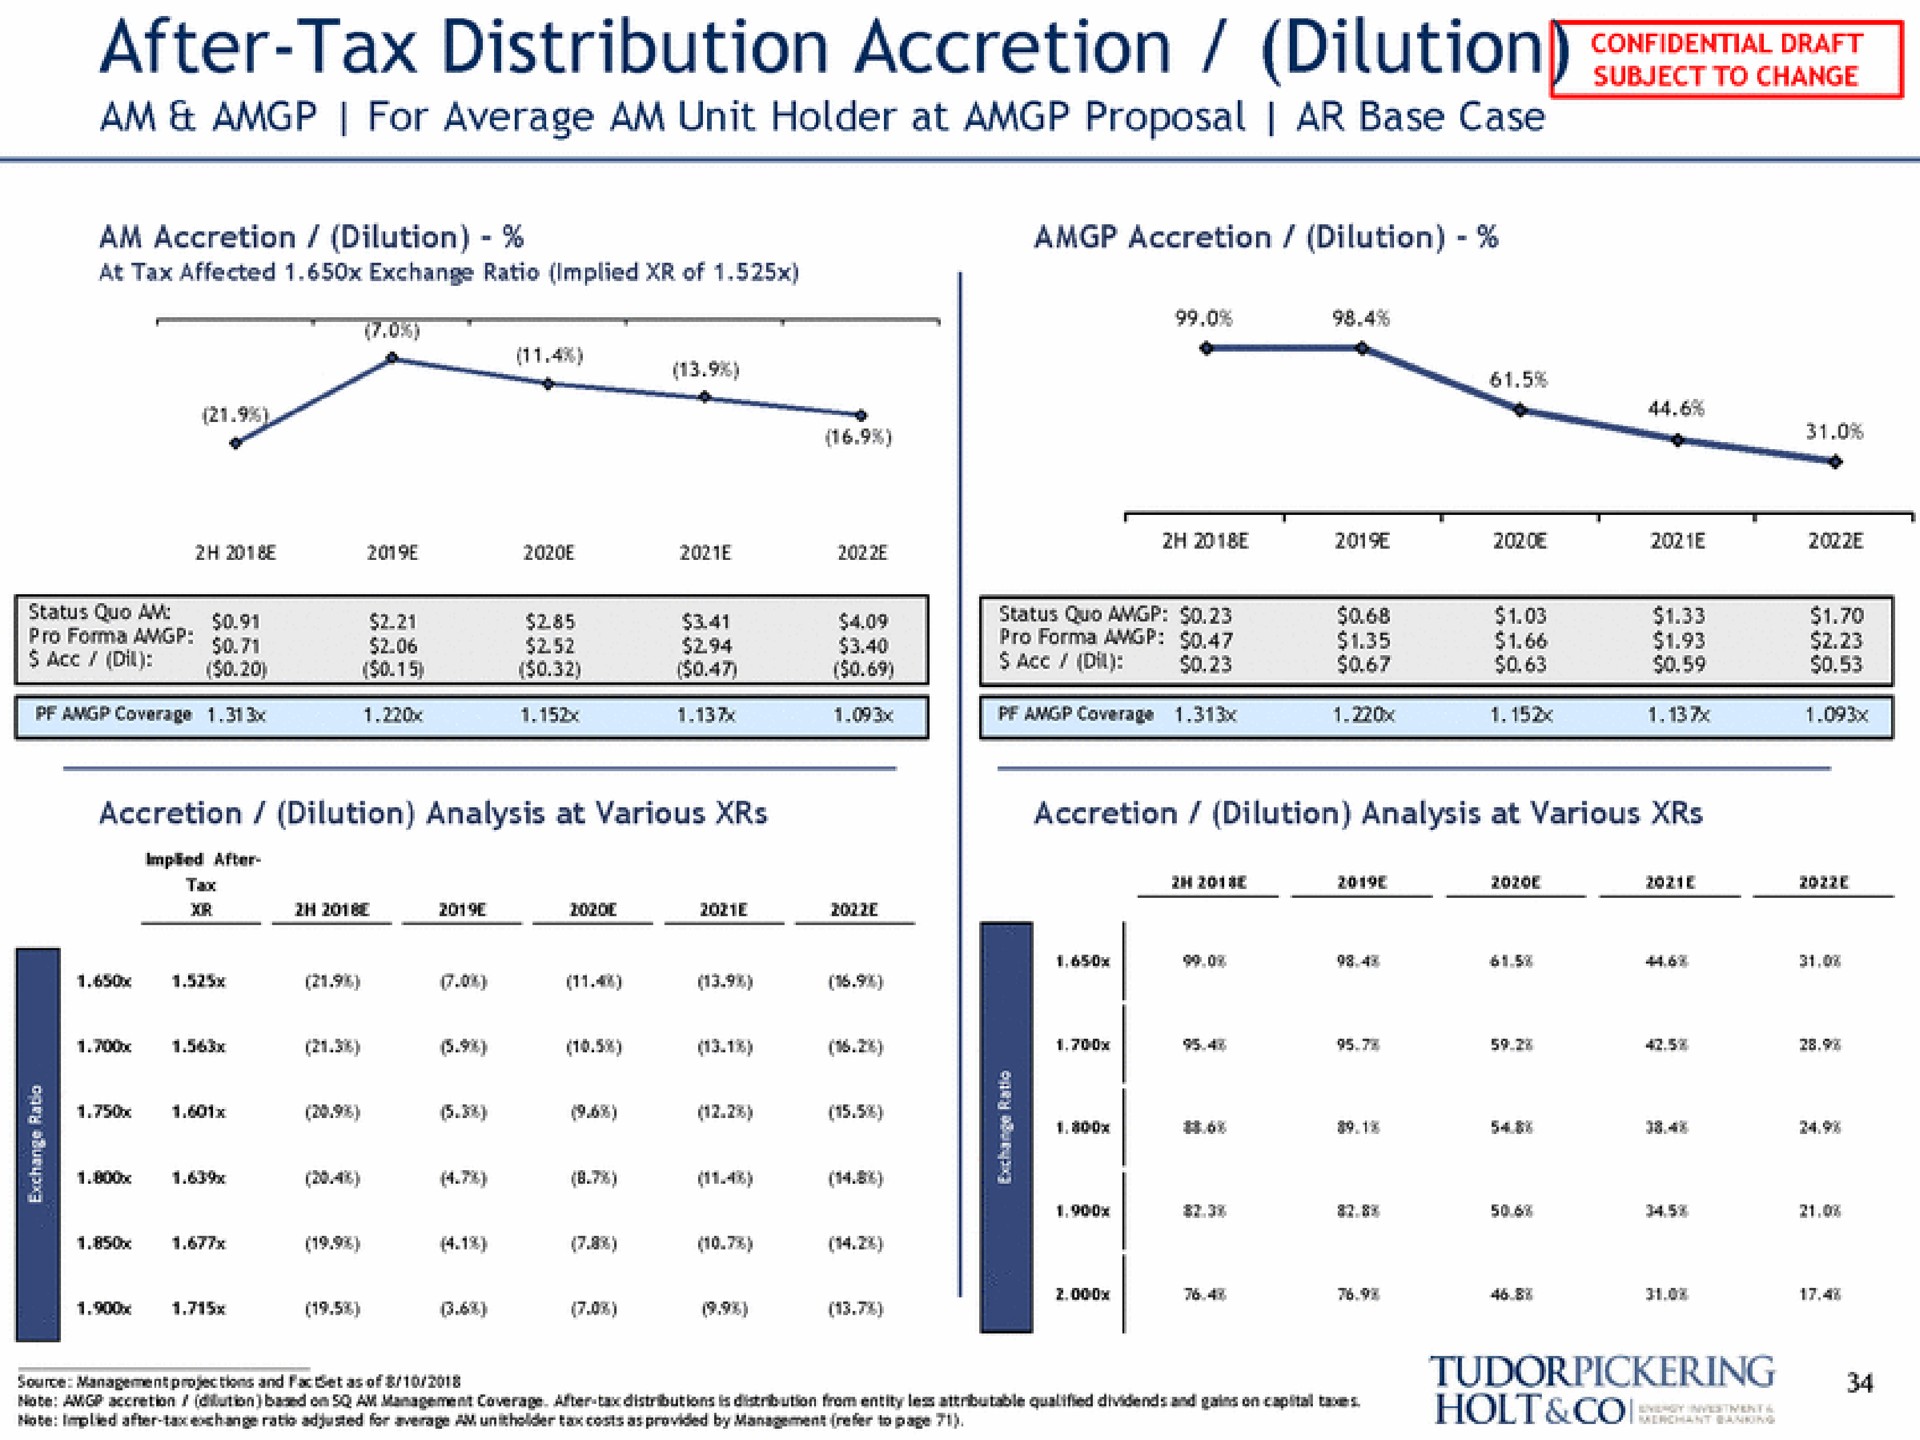 after tax distribution accretion dilution am for average am unit holder at proposal base case | Tudor, Pickering, Holt & Co